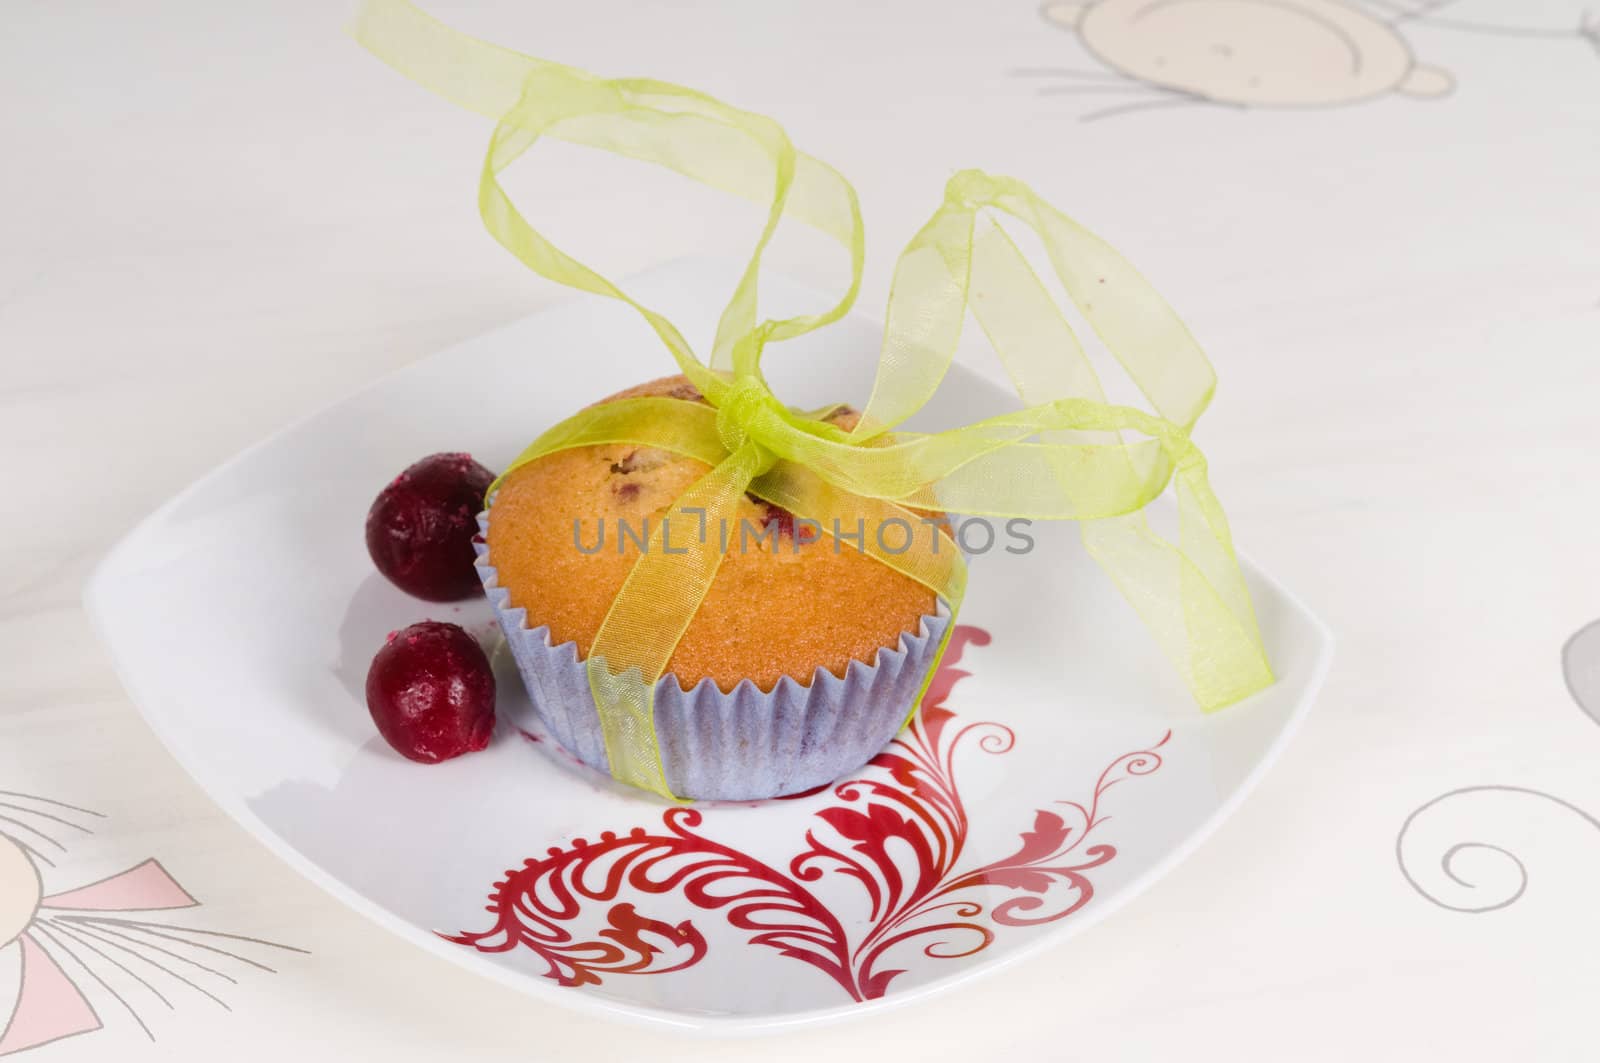 Cup-cakes on the table decorated with cherry